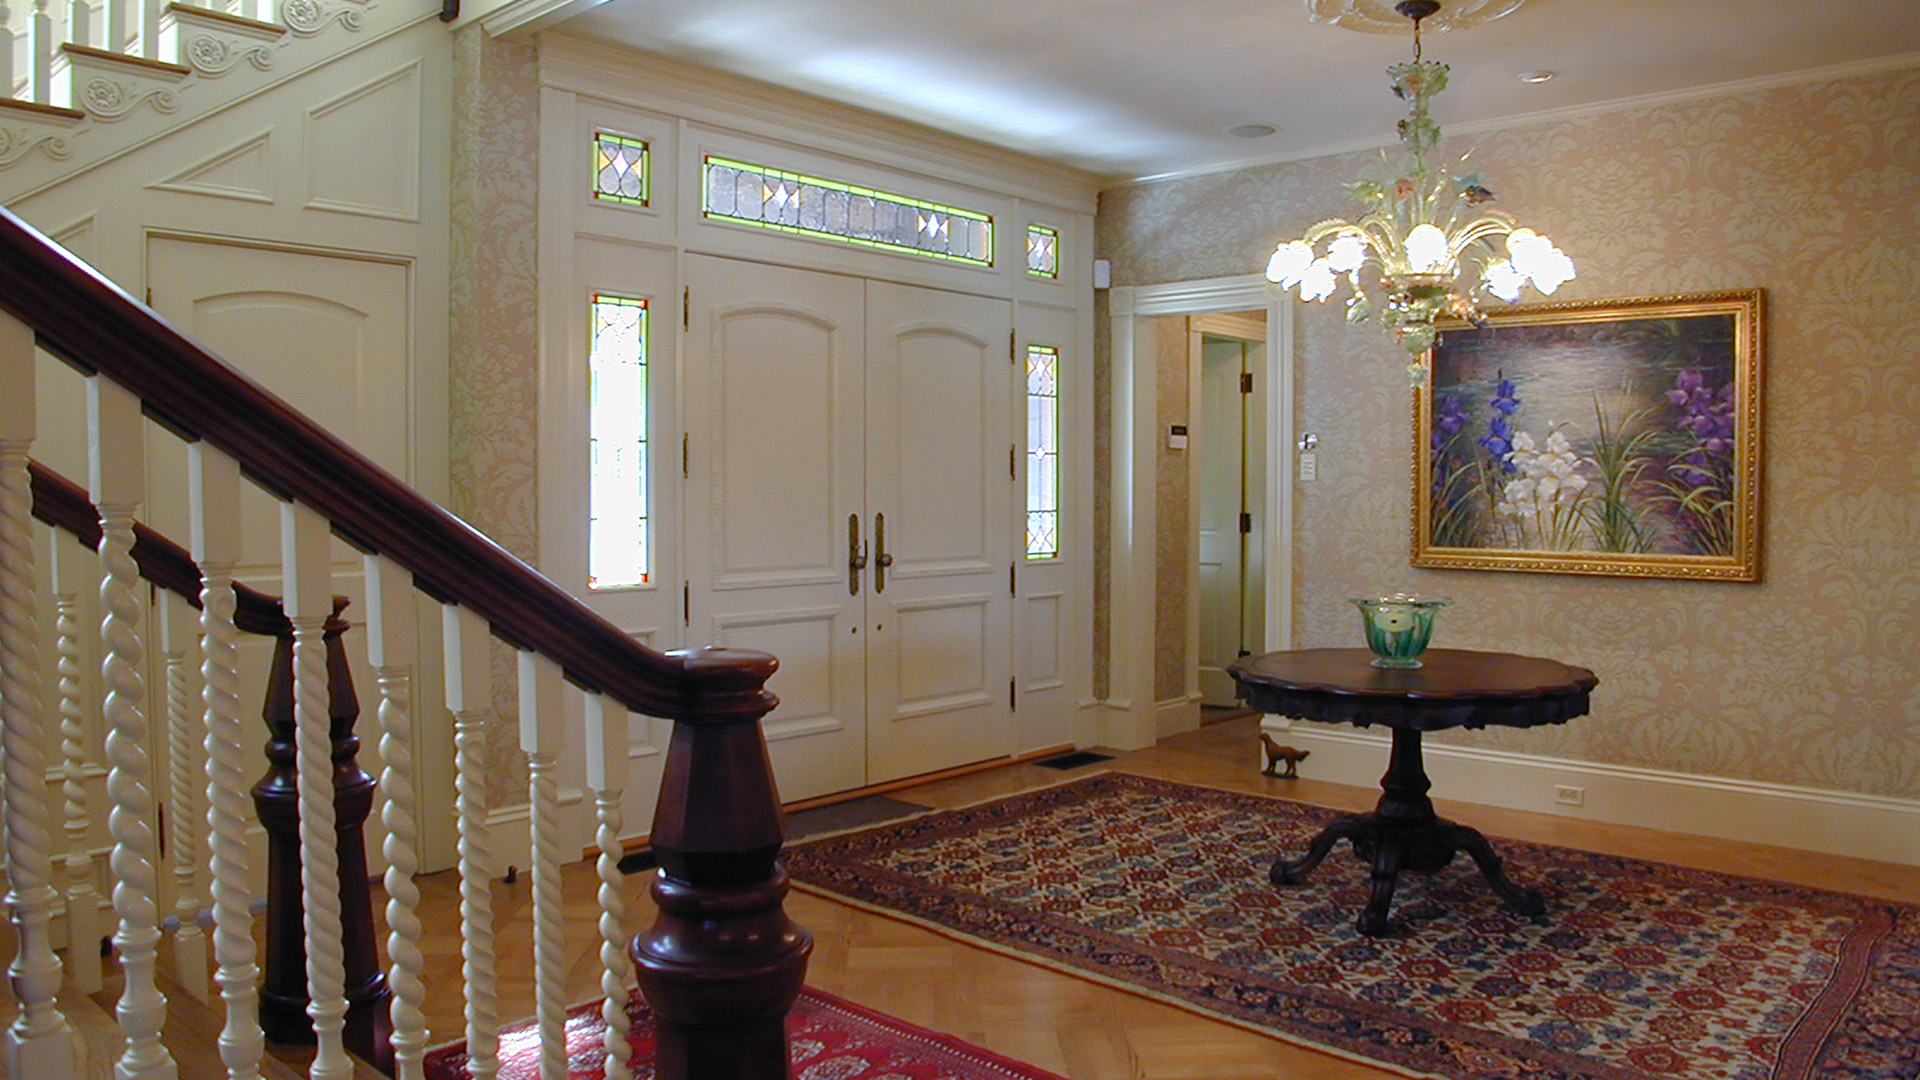 Concord Massachusetts interior of front entry with custom wood doors and stained glass sidelights